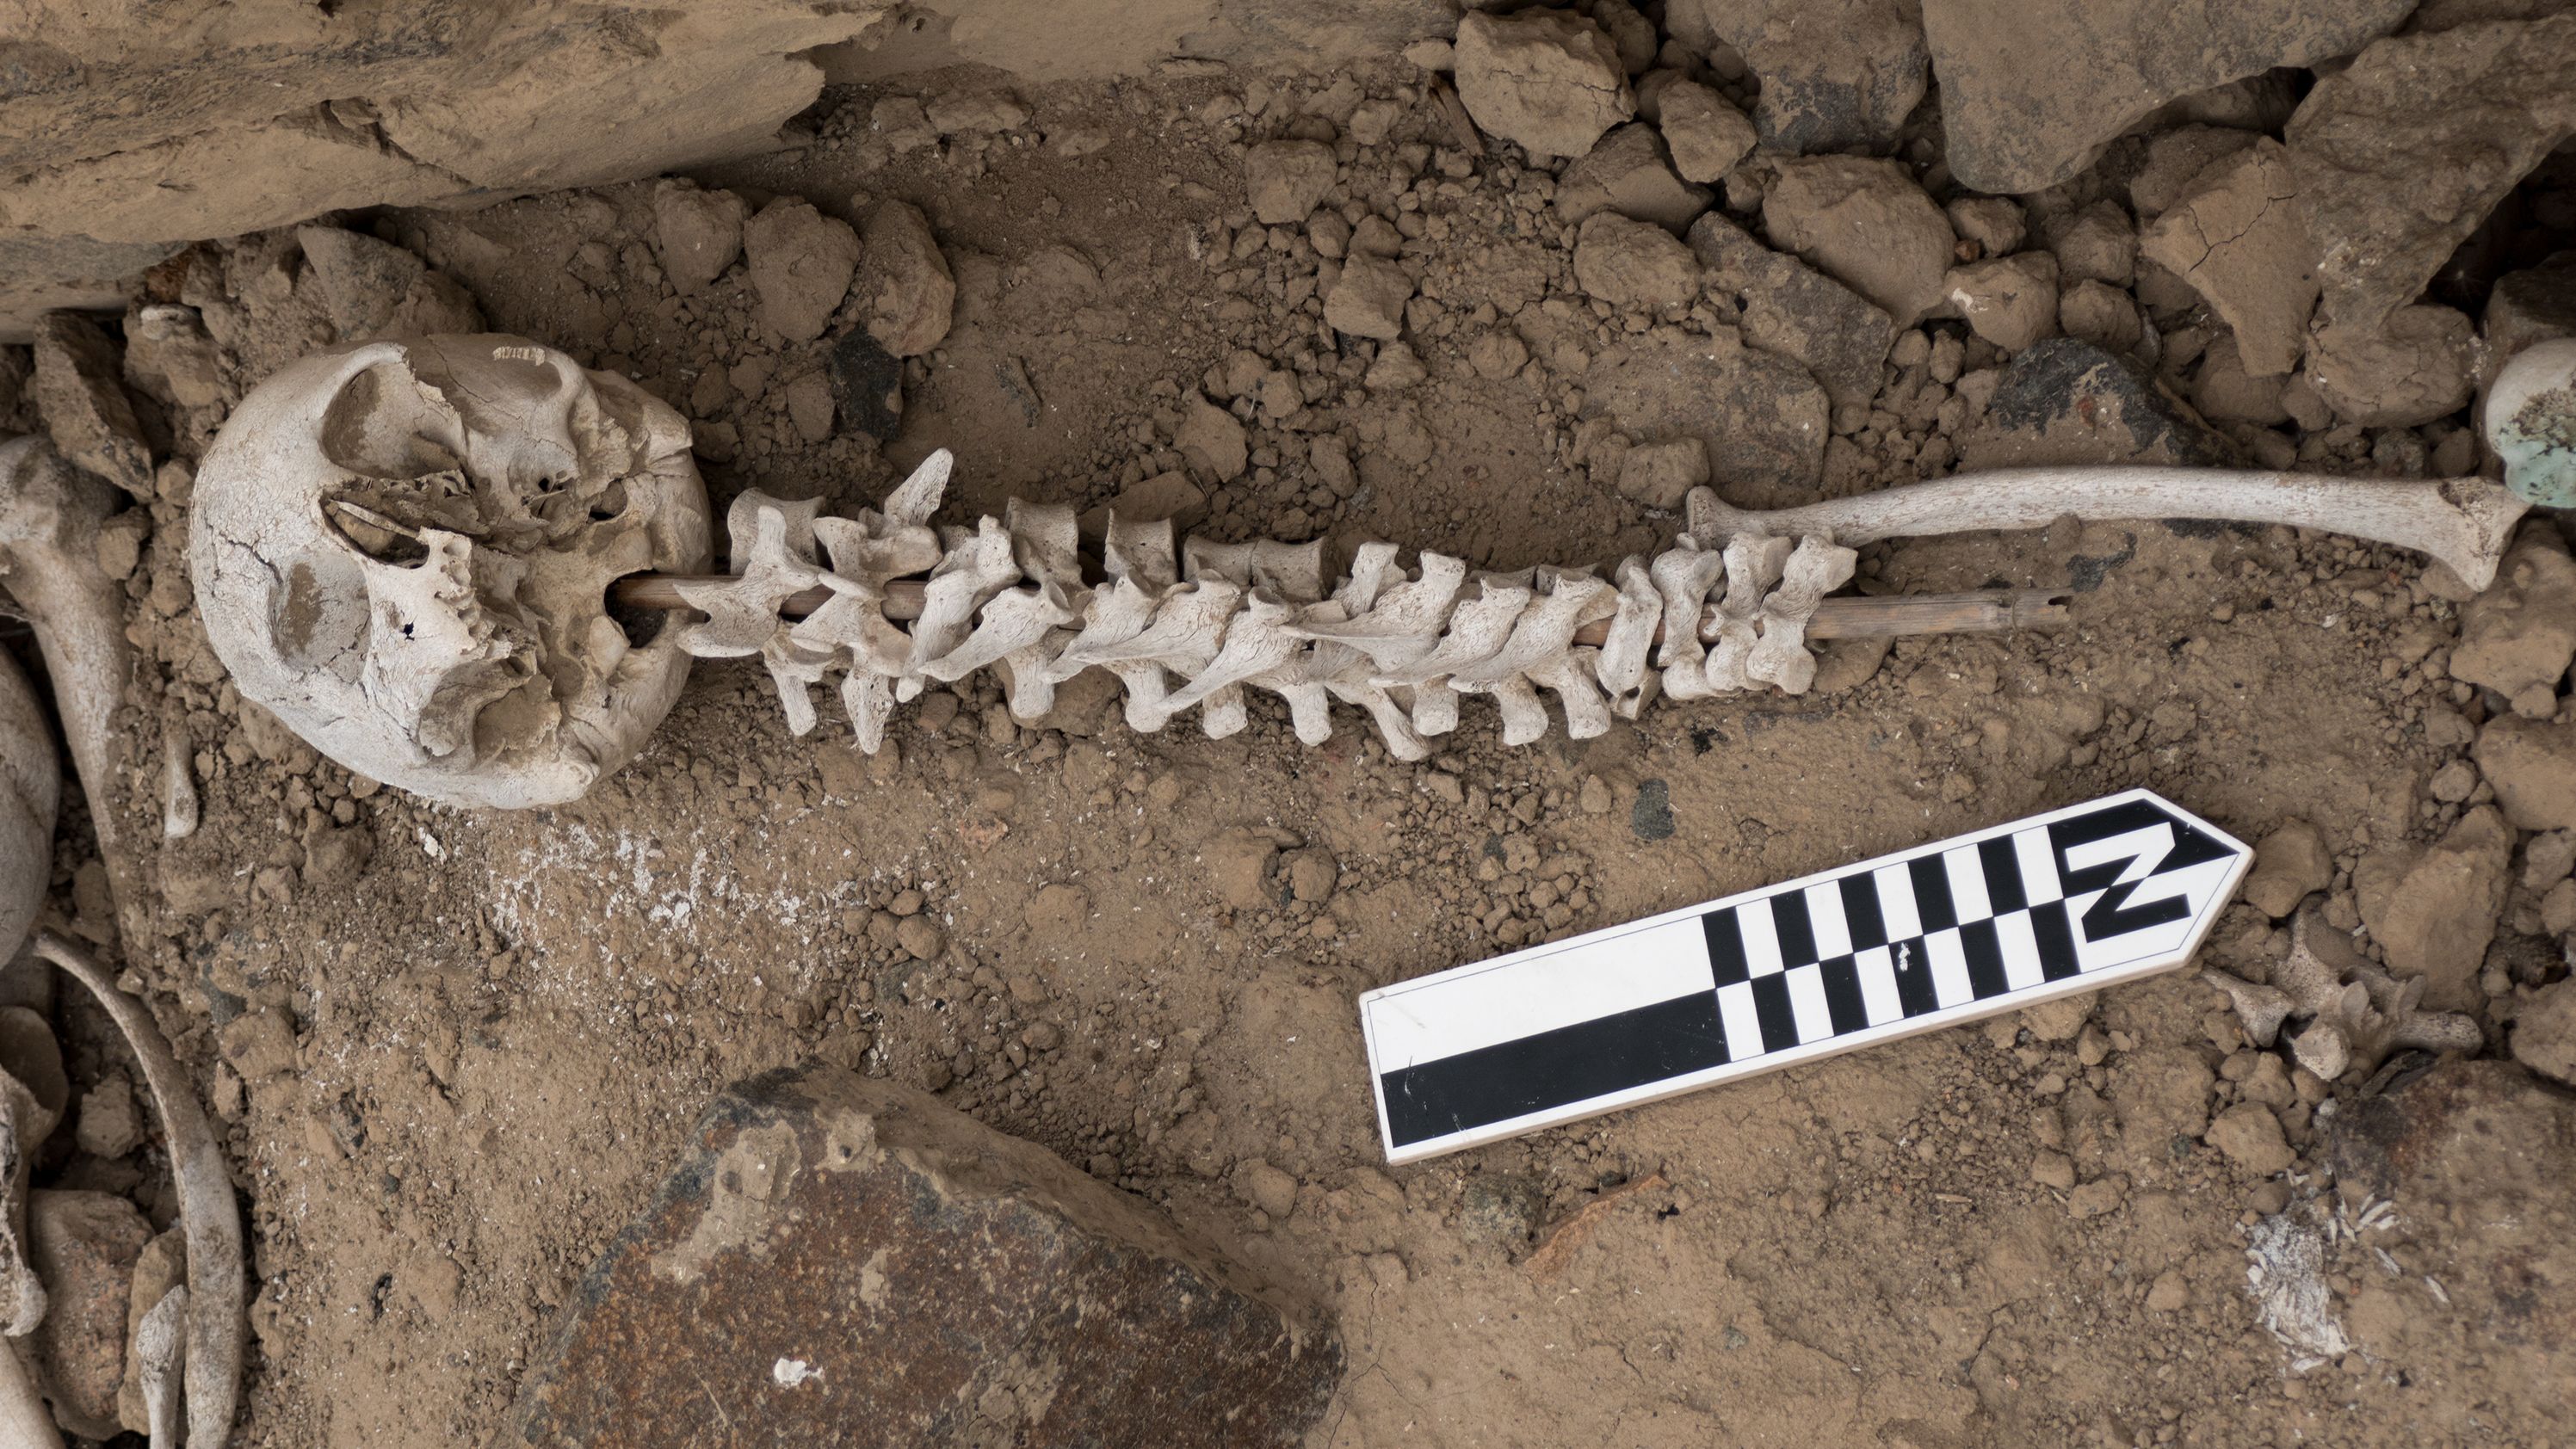 A vertebrae-on-post was inserted into a cranium, as found within a "chullpa."